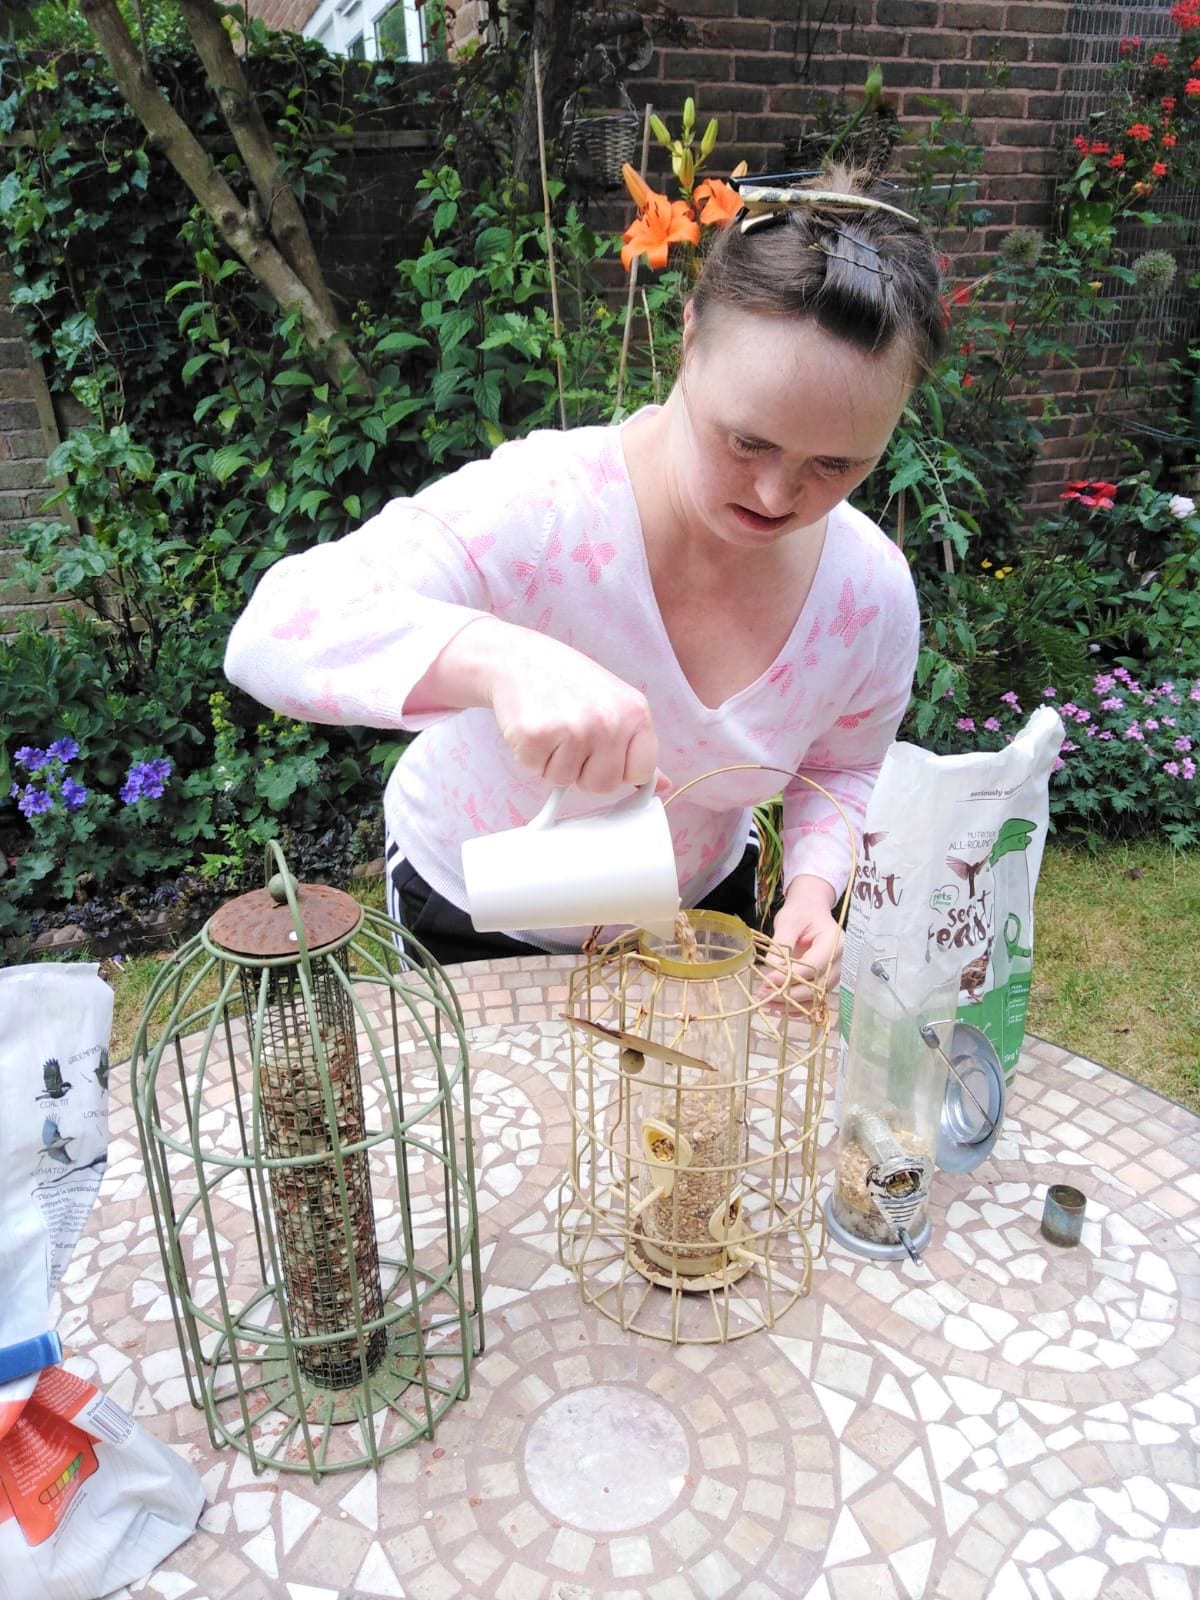 A woman fills bird feeders with seeds. She has Down's syndrome.